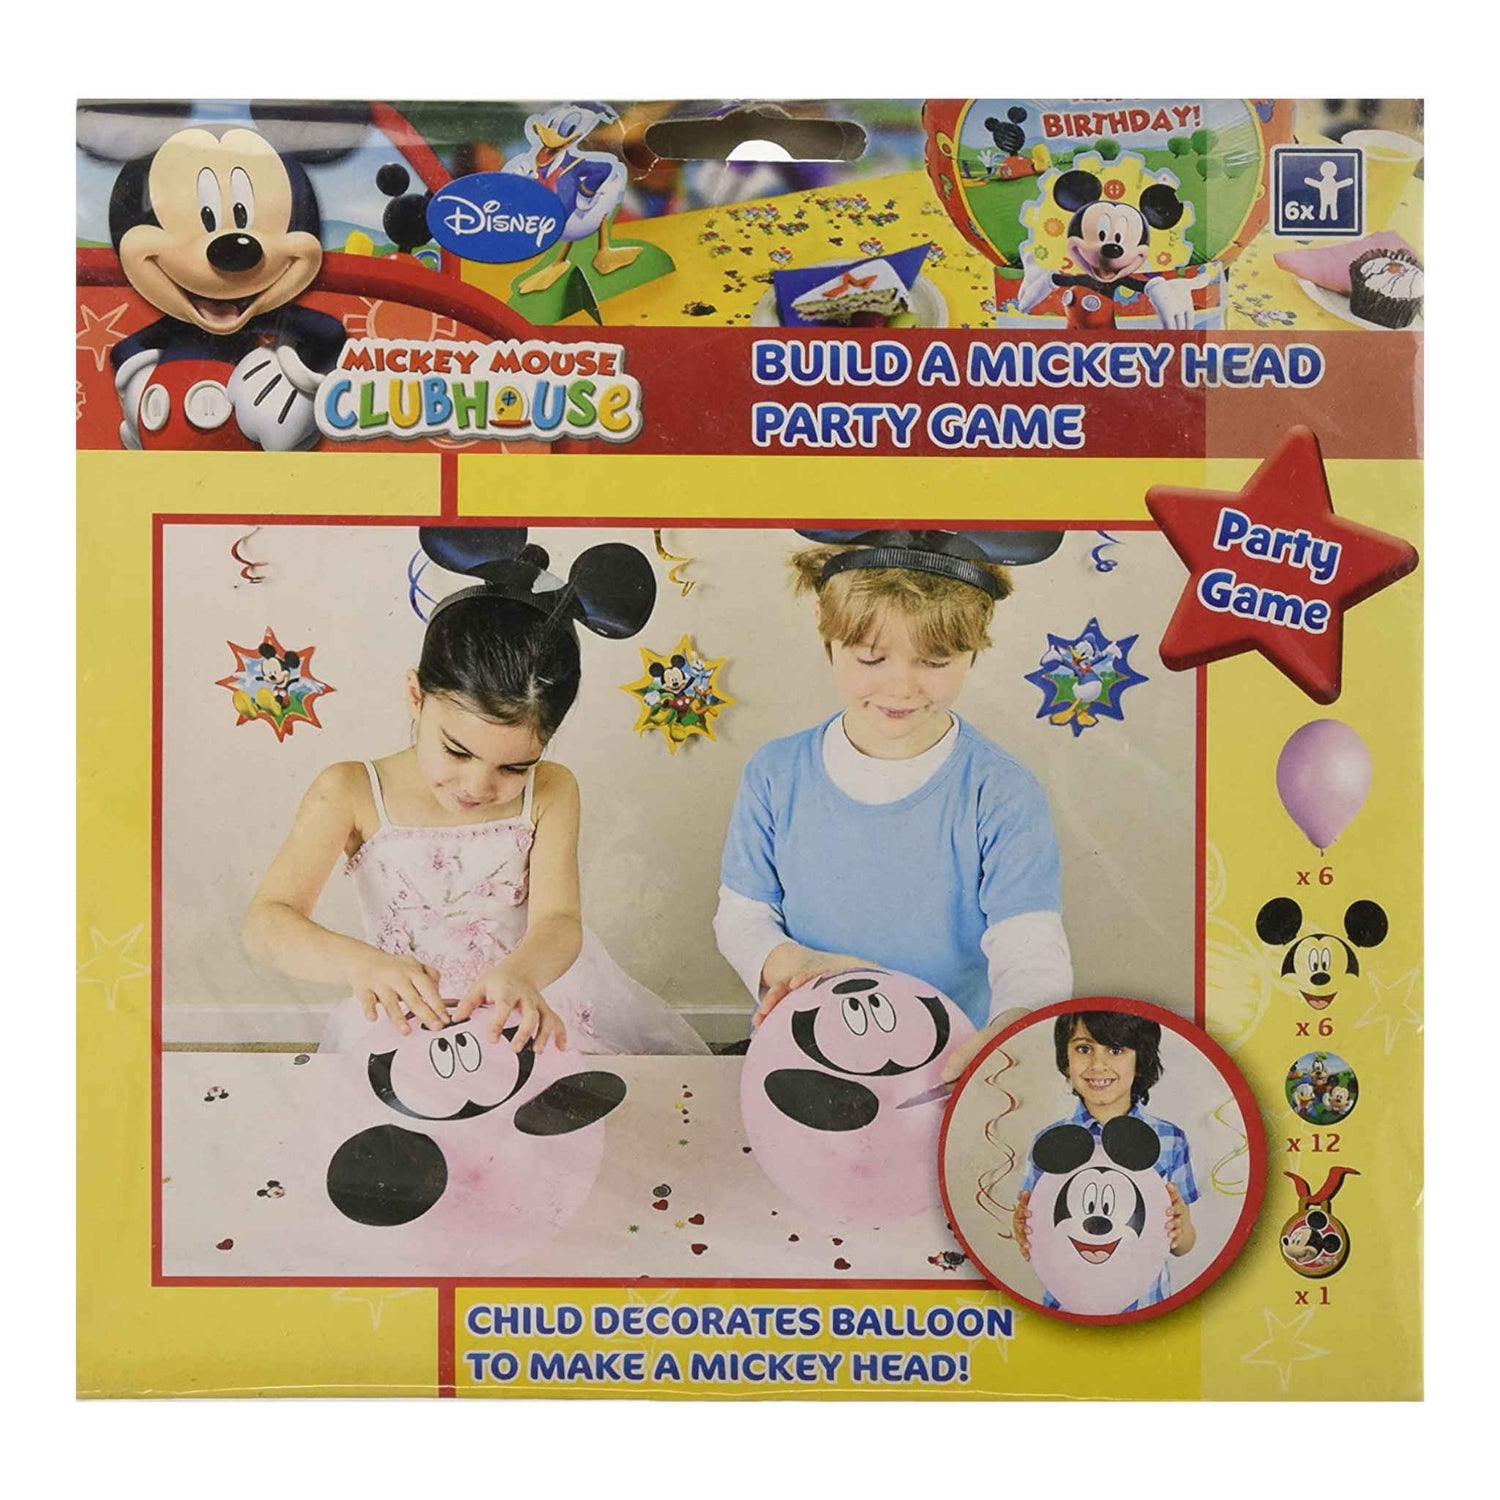 Disney Mickey Mouse Clubhouse Build a Mickey Head Party Game